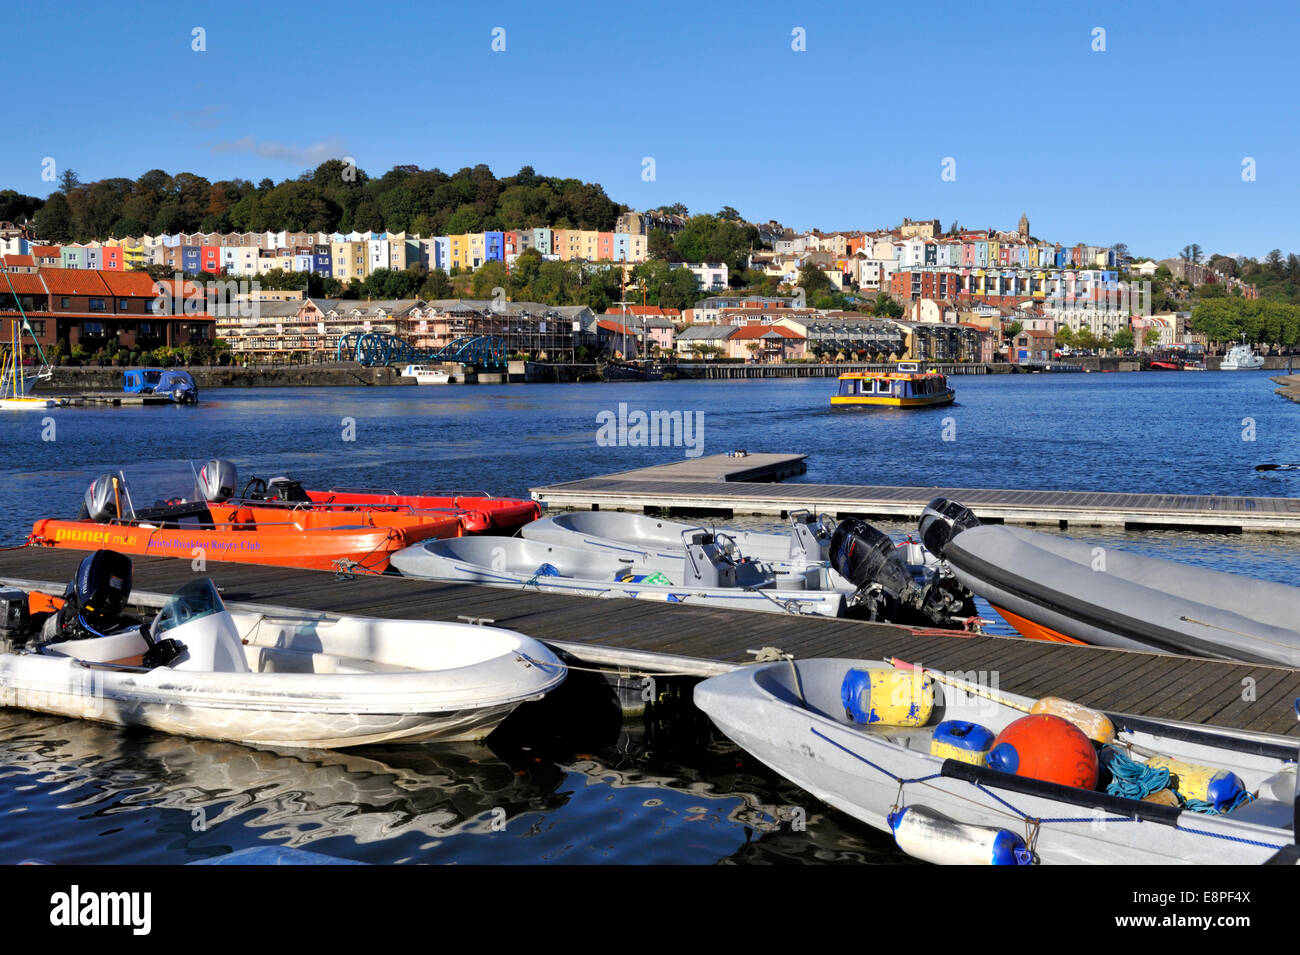 Bristol City Docks flouting harbour, boats moored in Underfall Yard by slipway with Hotwells and Clifton Wood in background, UK Stock Photo